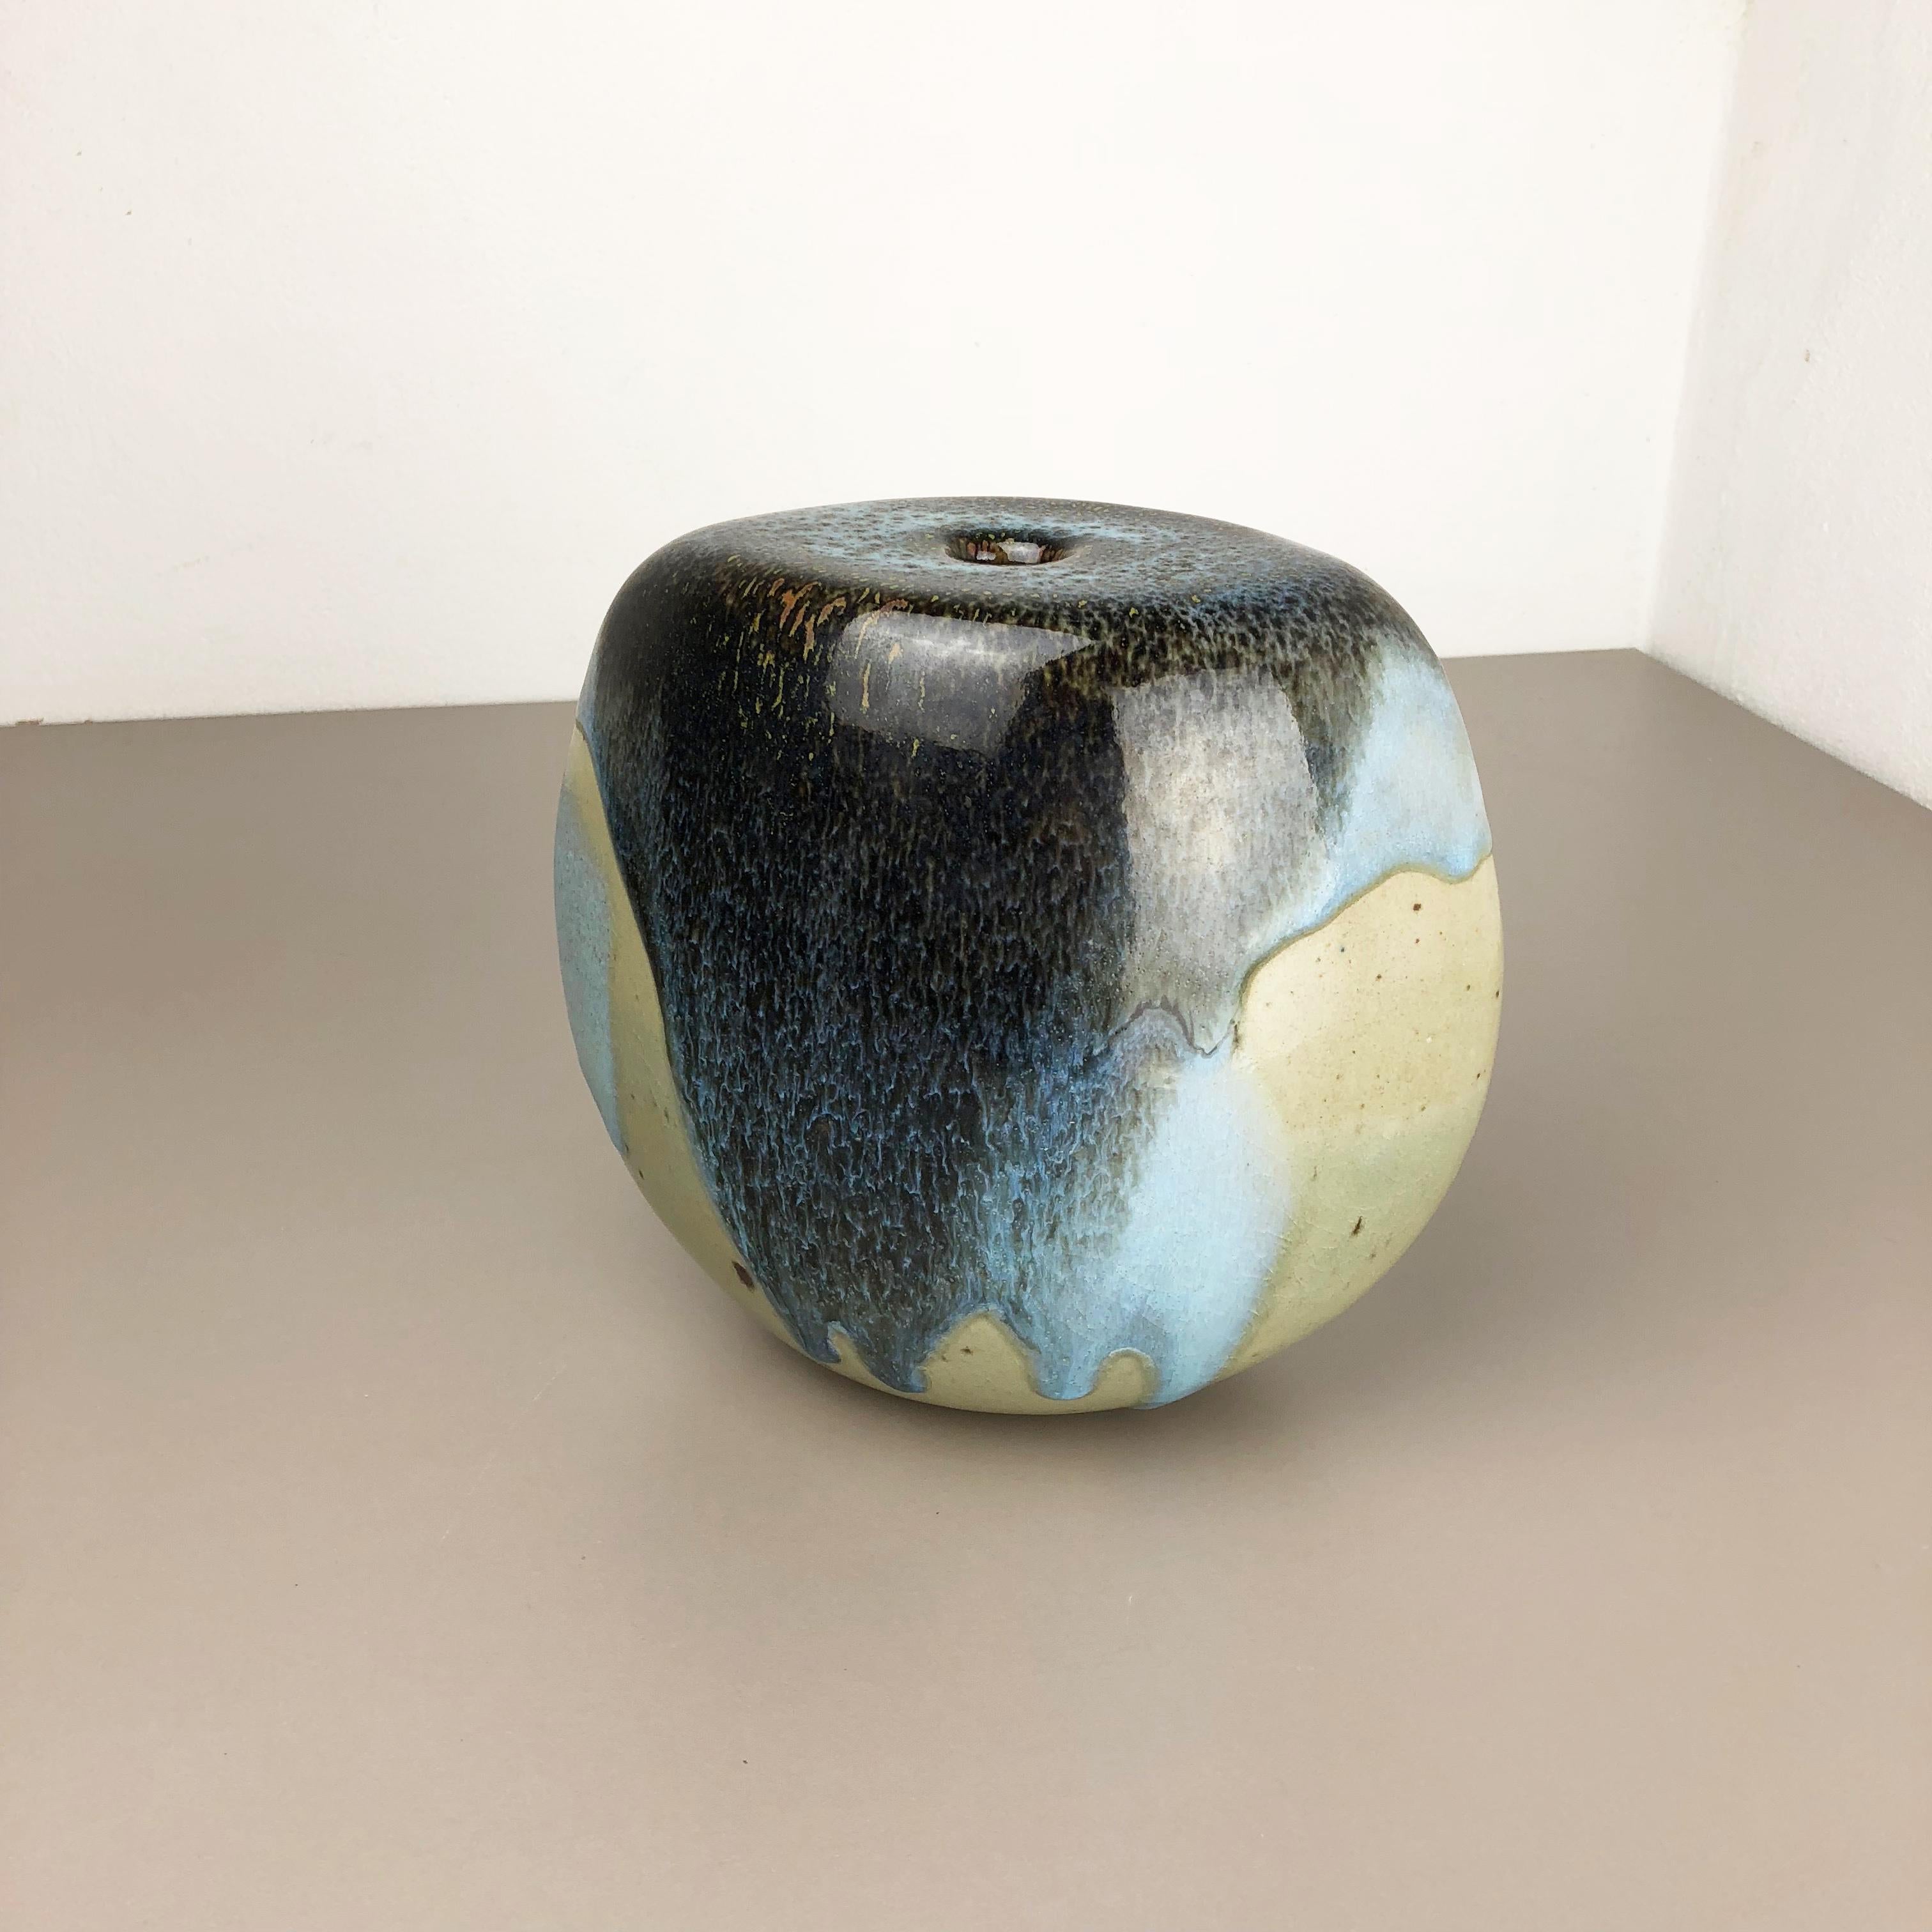 Abstract Ceramic Studio Stoneware Vase by Gotlind Weigel, Germany, 1960s For Sale 1